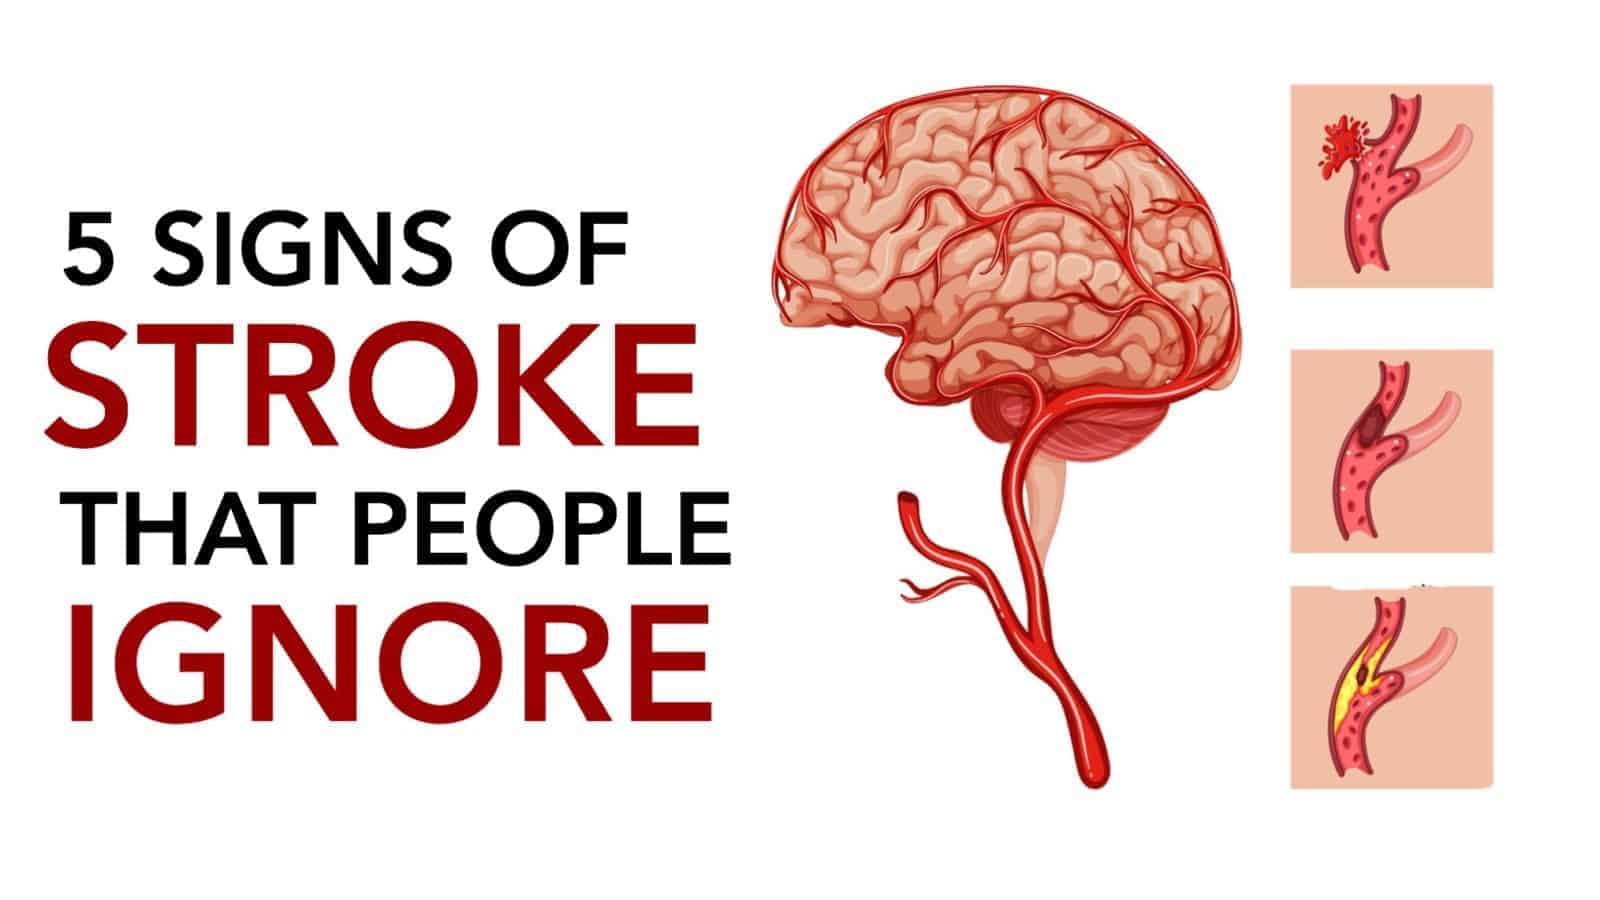 5 Signs of Stroke That People Ignore